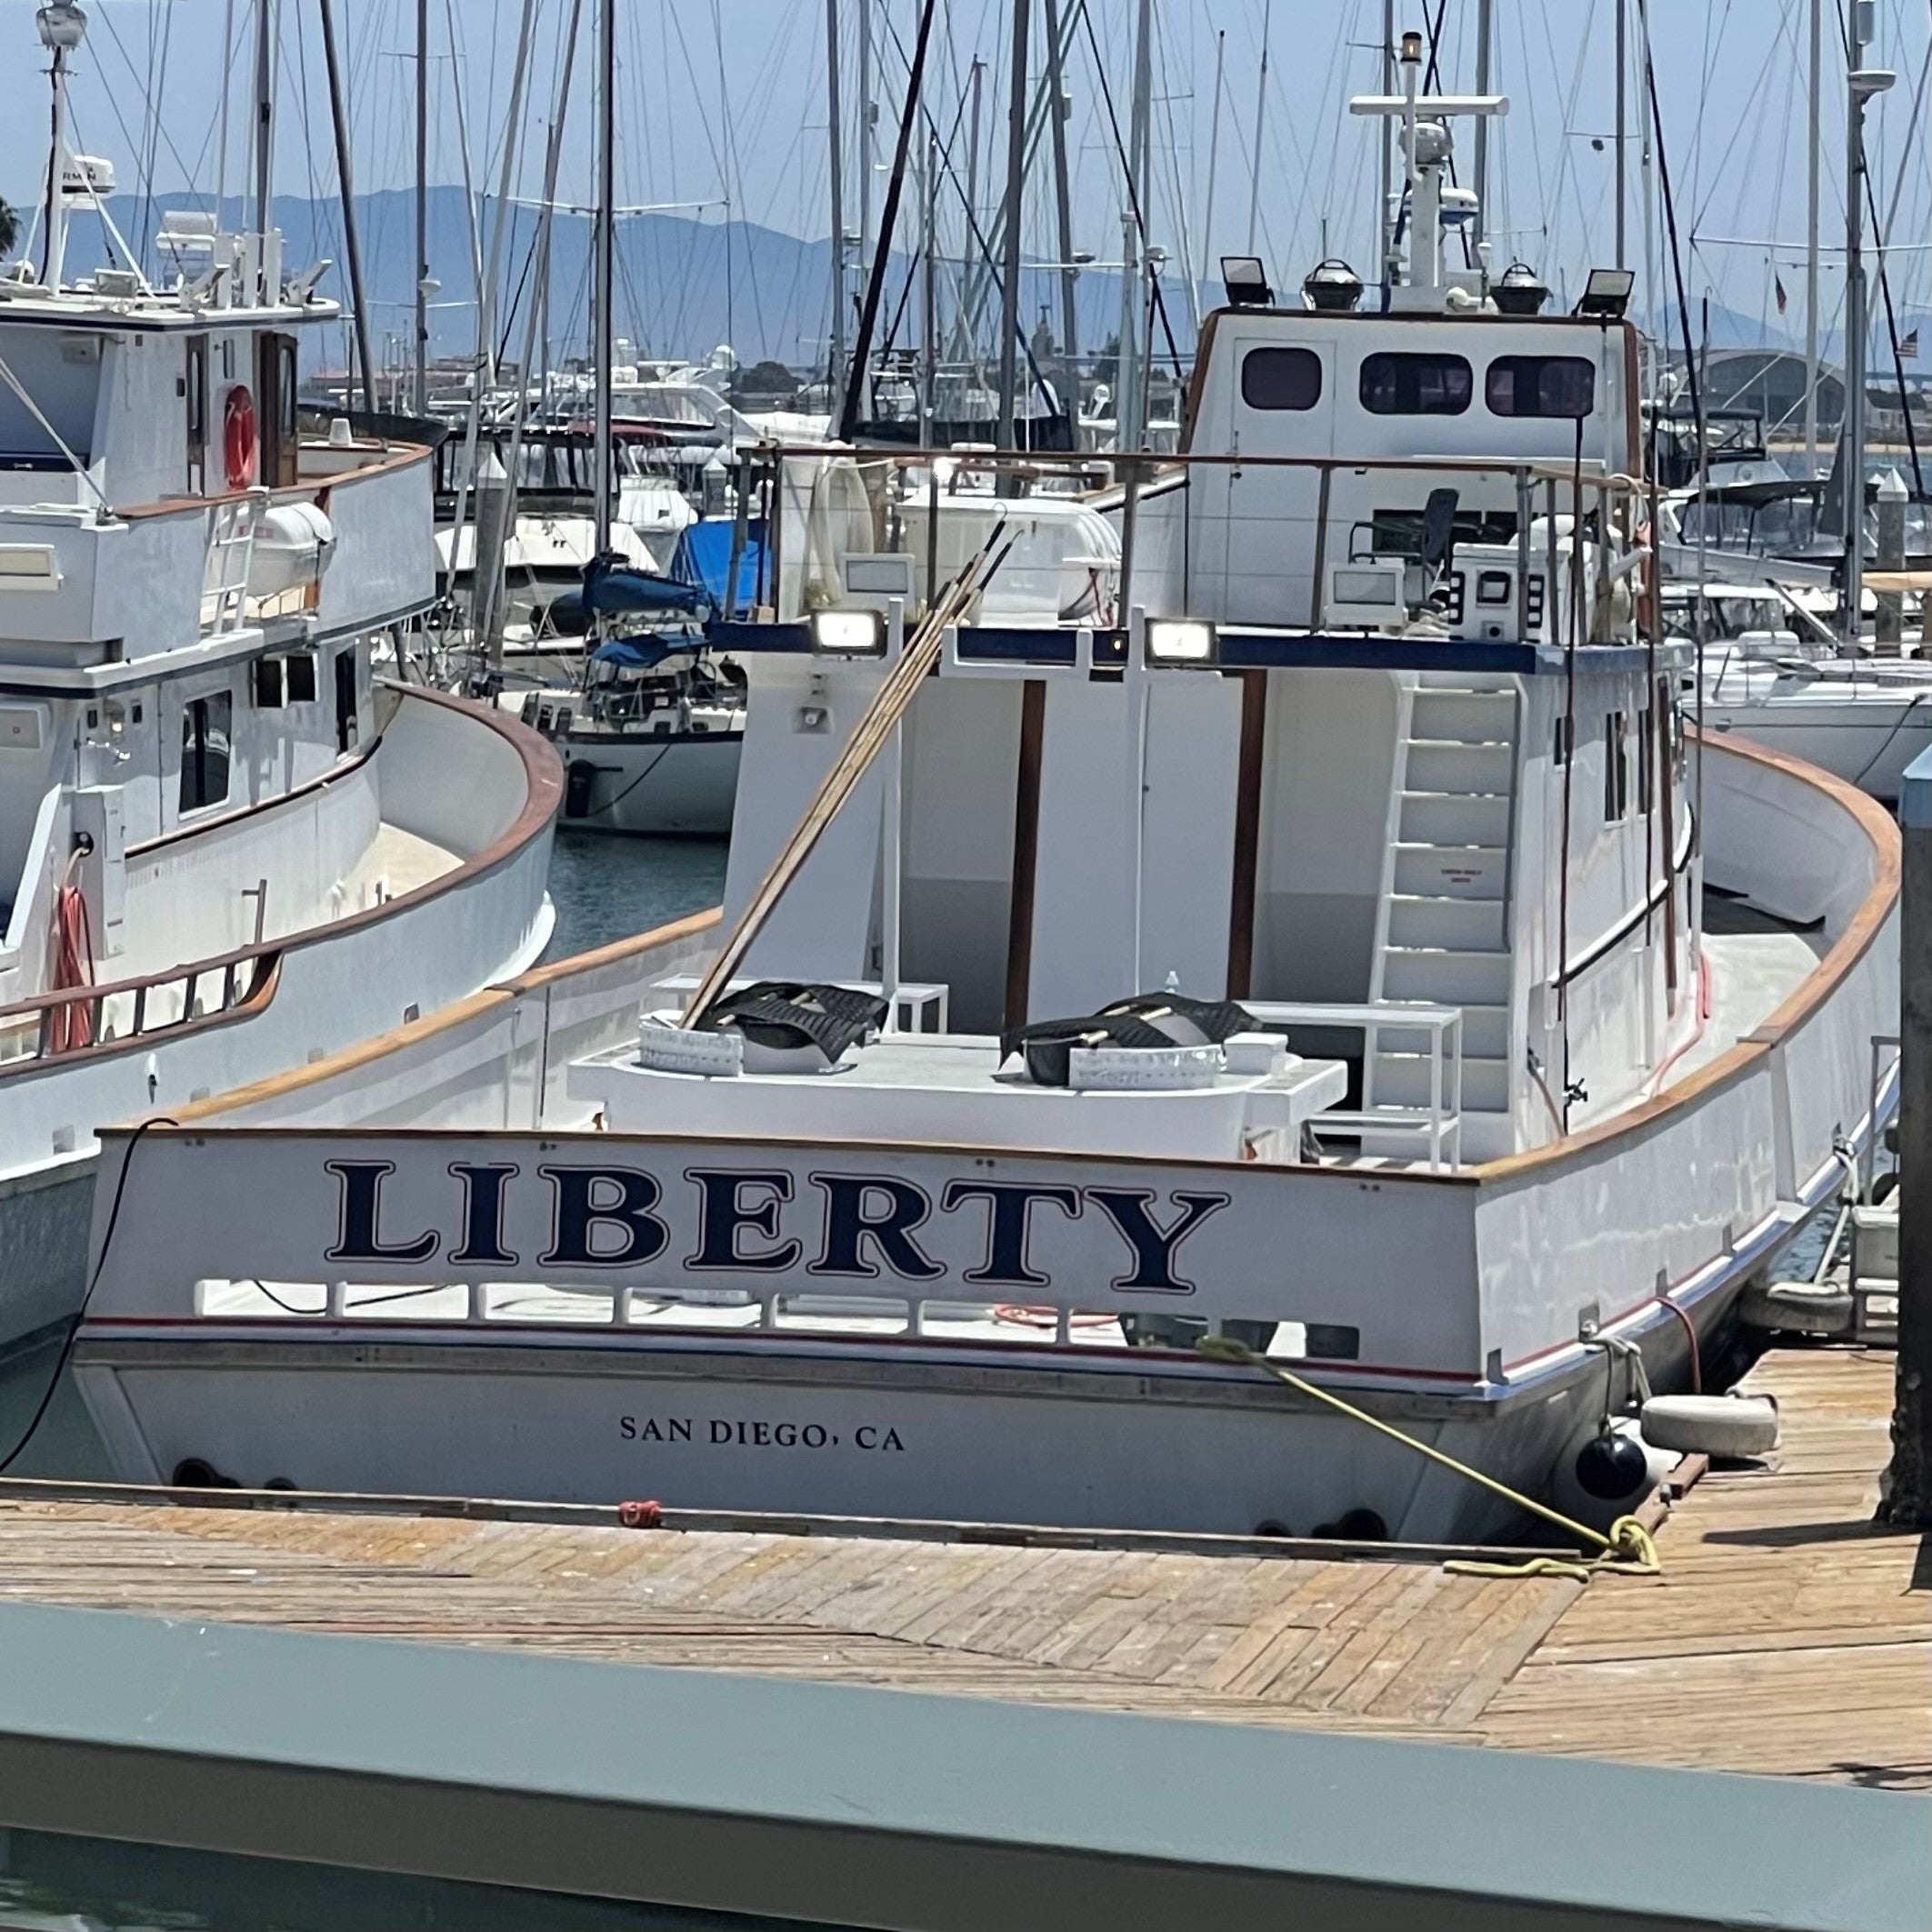 TRIP REPORT: FULL DAY OFFSHORE ABOARD THE LIBERTY 5/15/22